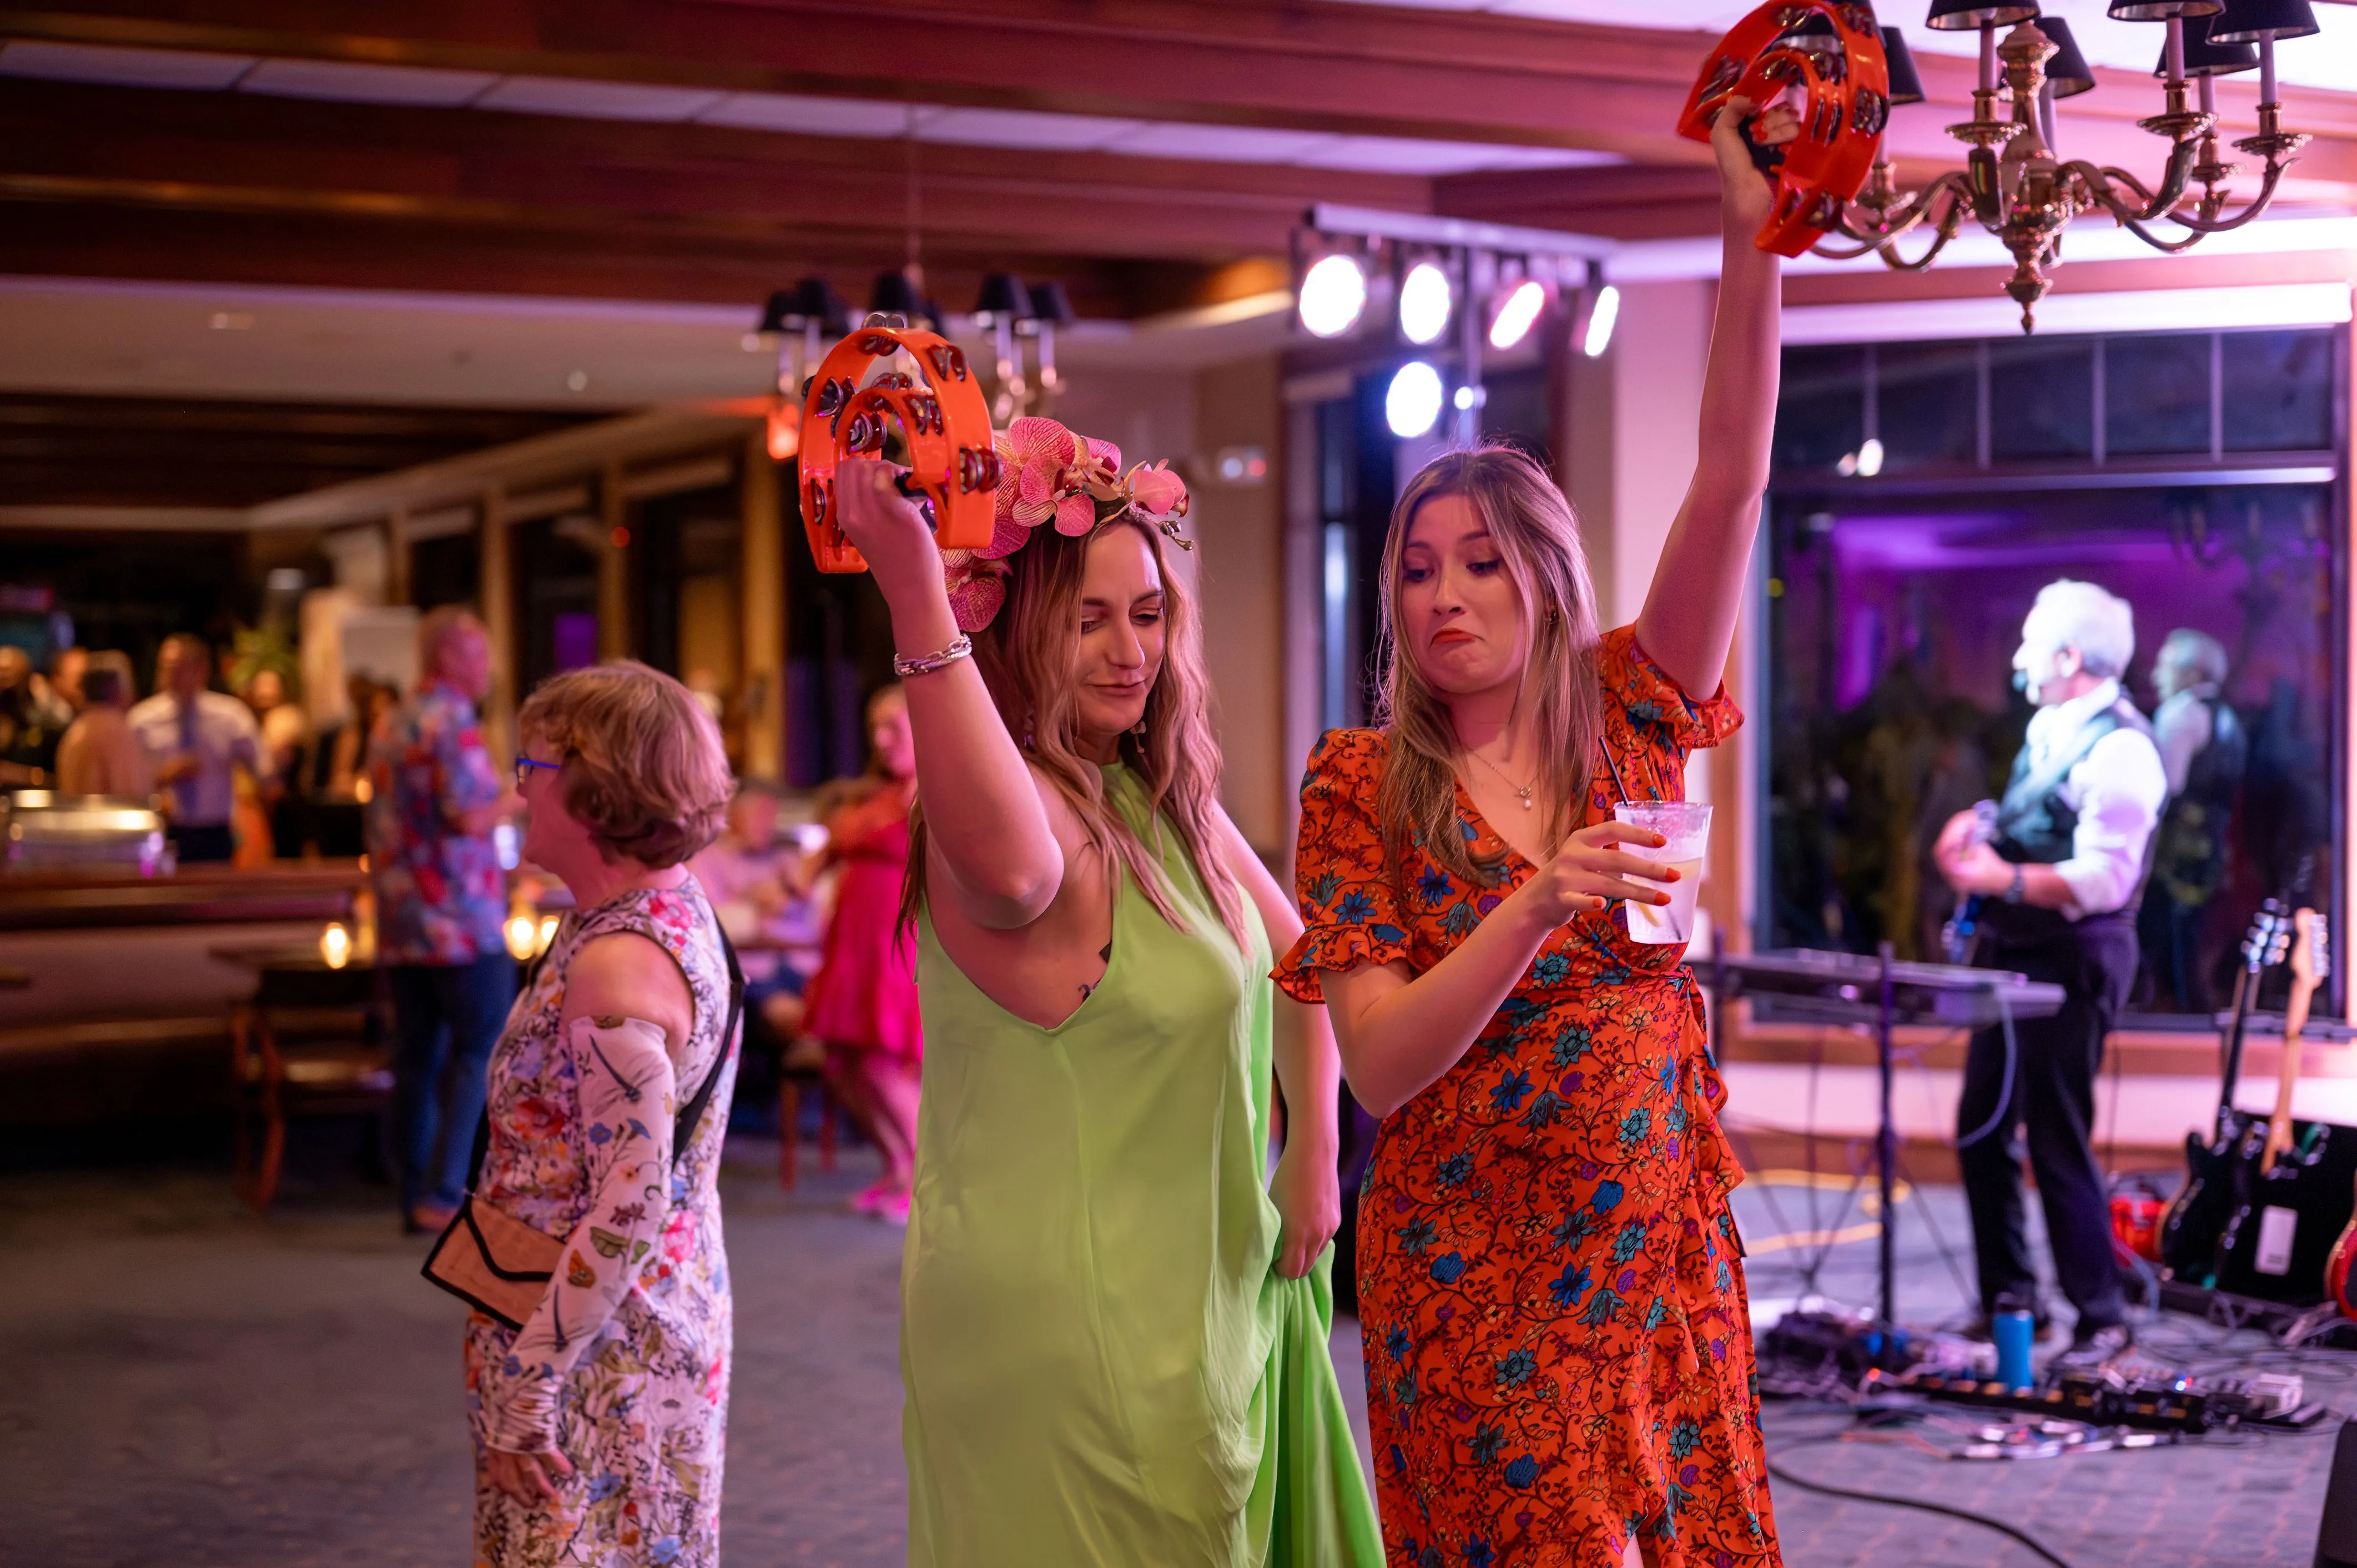 Two women dancing holding flower bouquets at a festive event with a live band in the background.